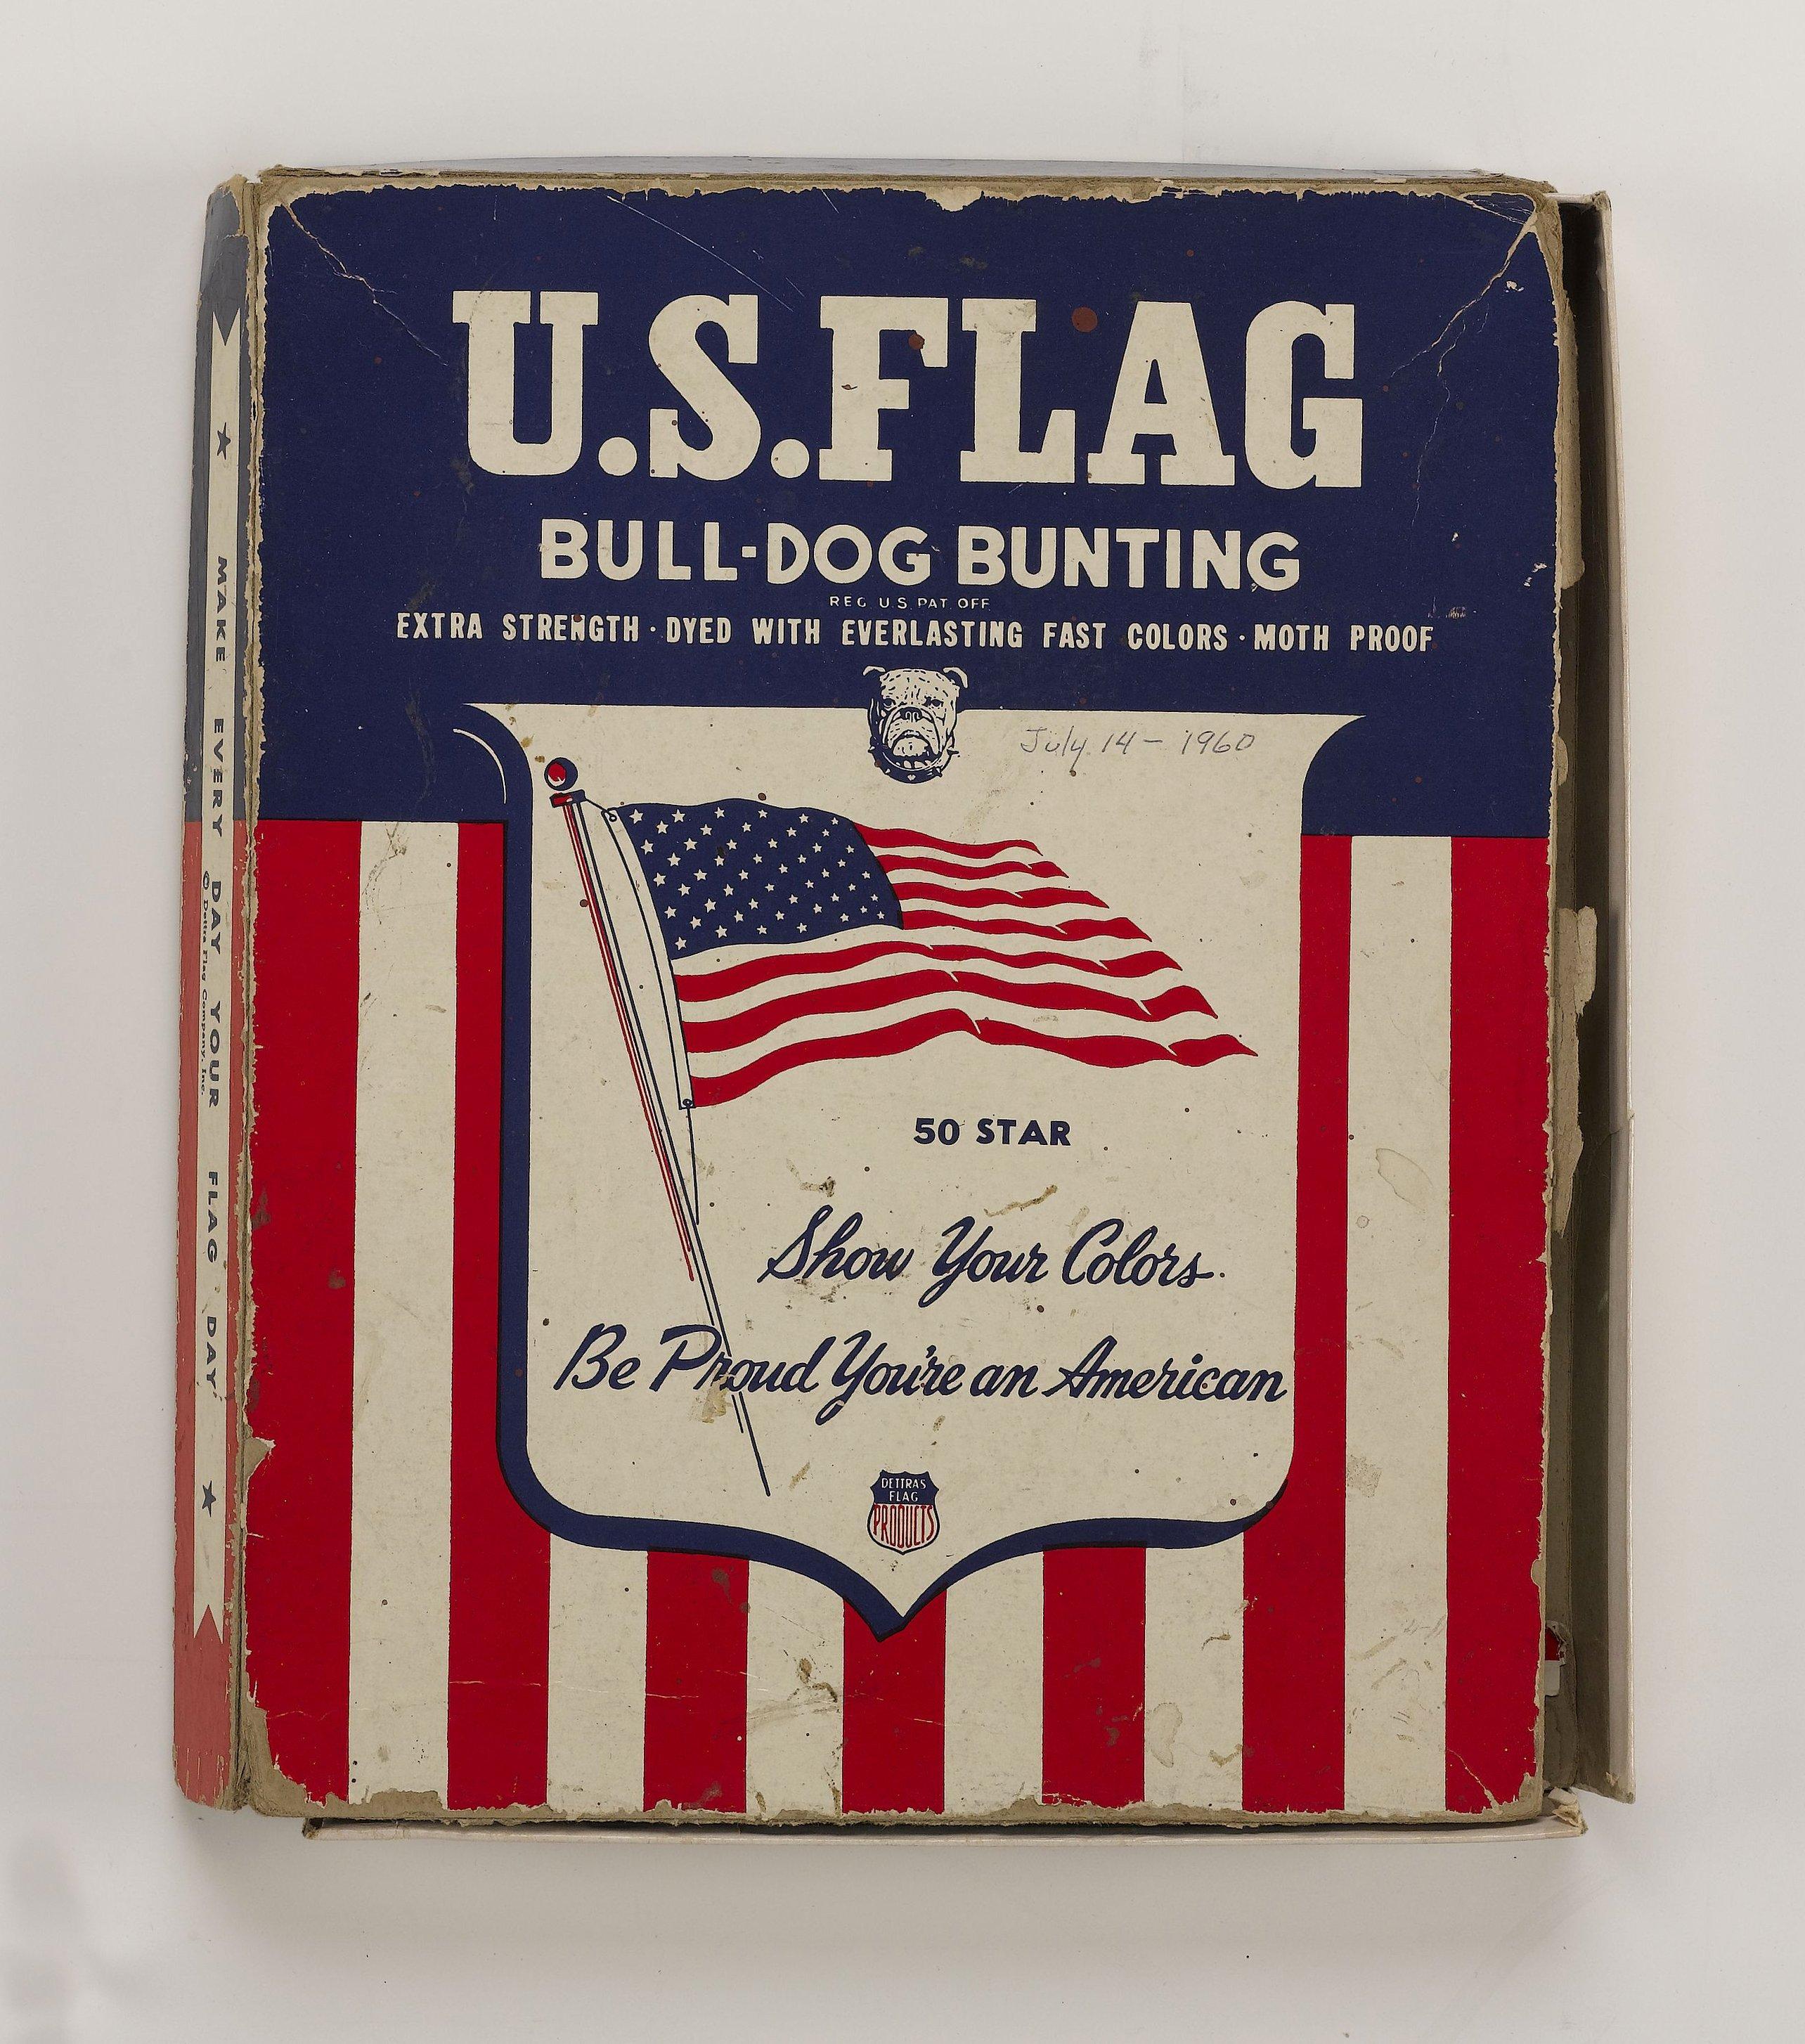 50-Star American flag, Flown over the U.S. Capitol on the Day 50-Star Flags Became Official, 1960

Presented is a cotton, machine-sewn flag with 50 stars. This flag was flown over the Capitol of the United States on July 4, 1960, the day the